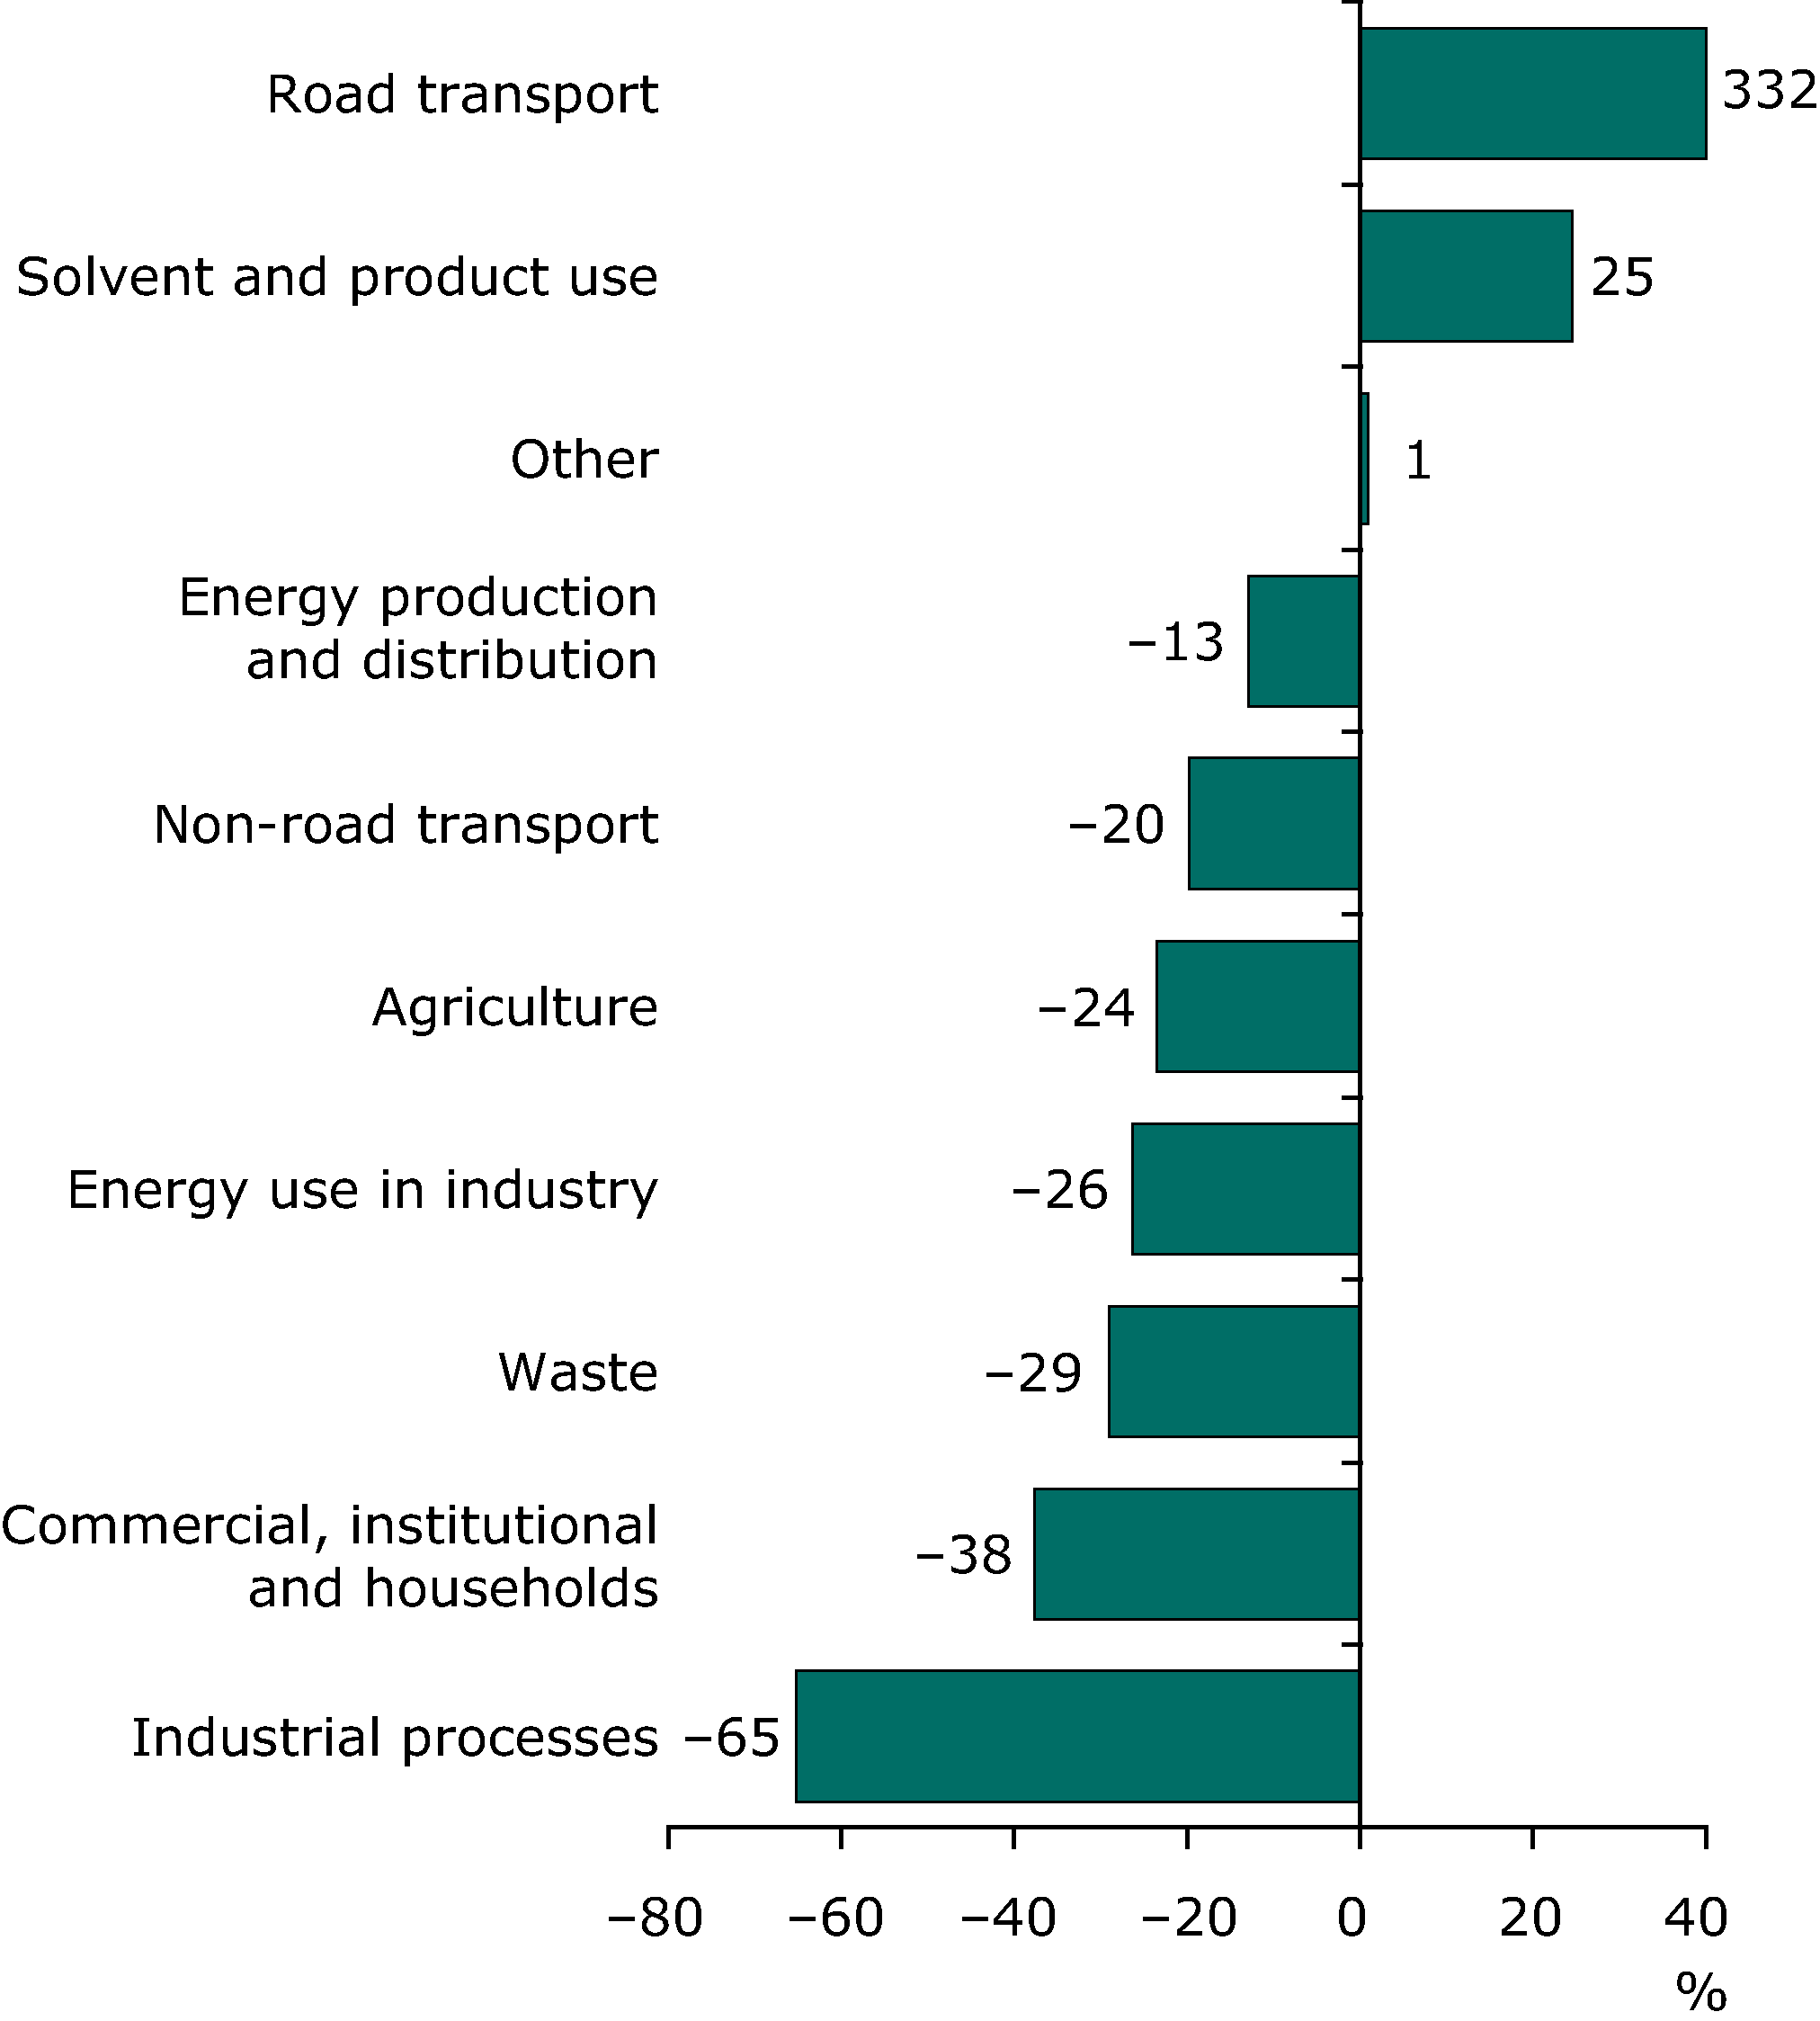 Change in ammonia emissions for each sector between 1990 and 2008 (EEA member countries)